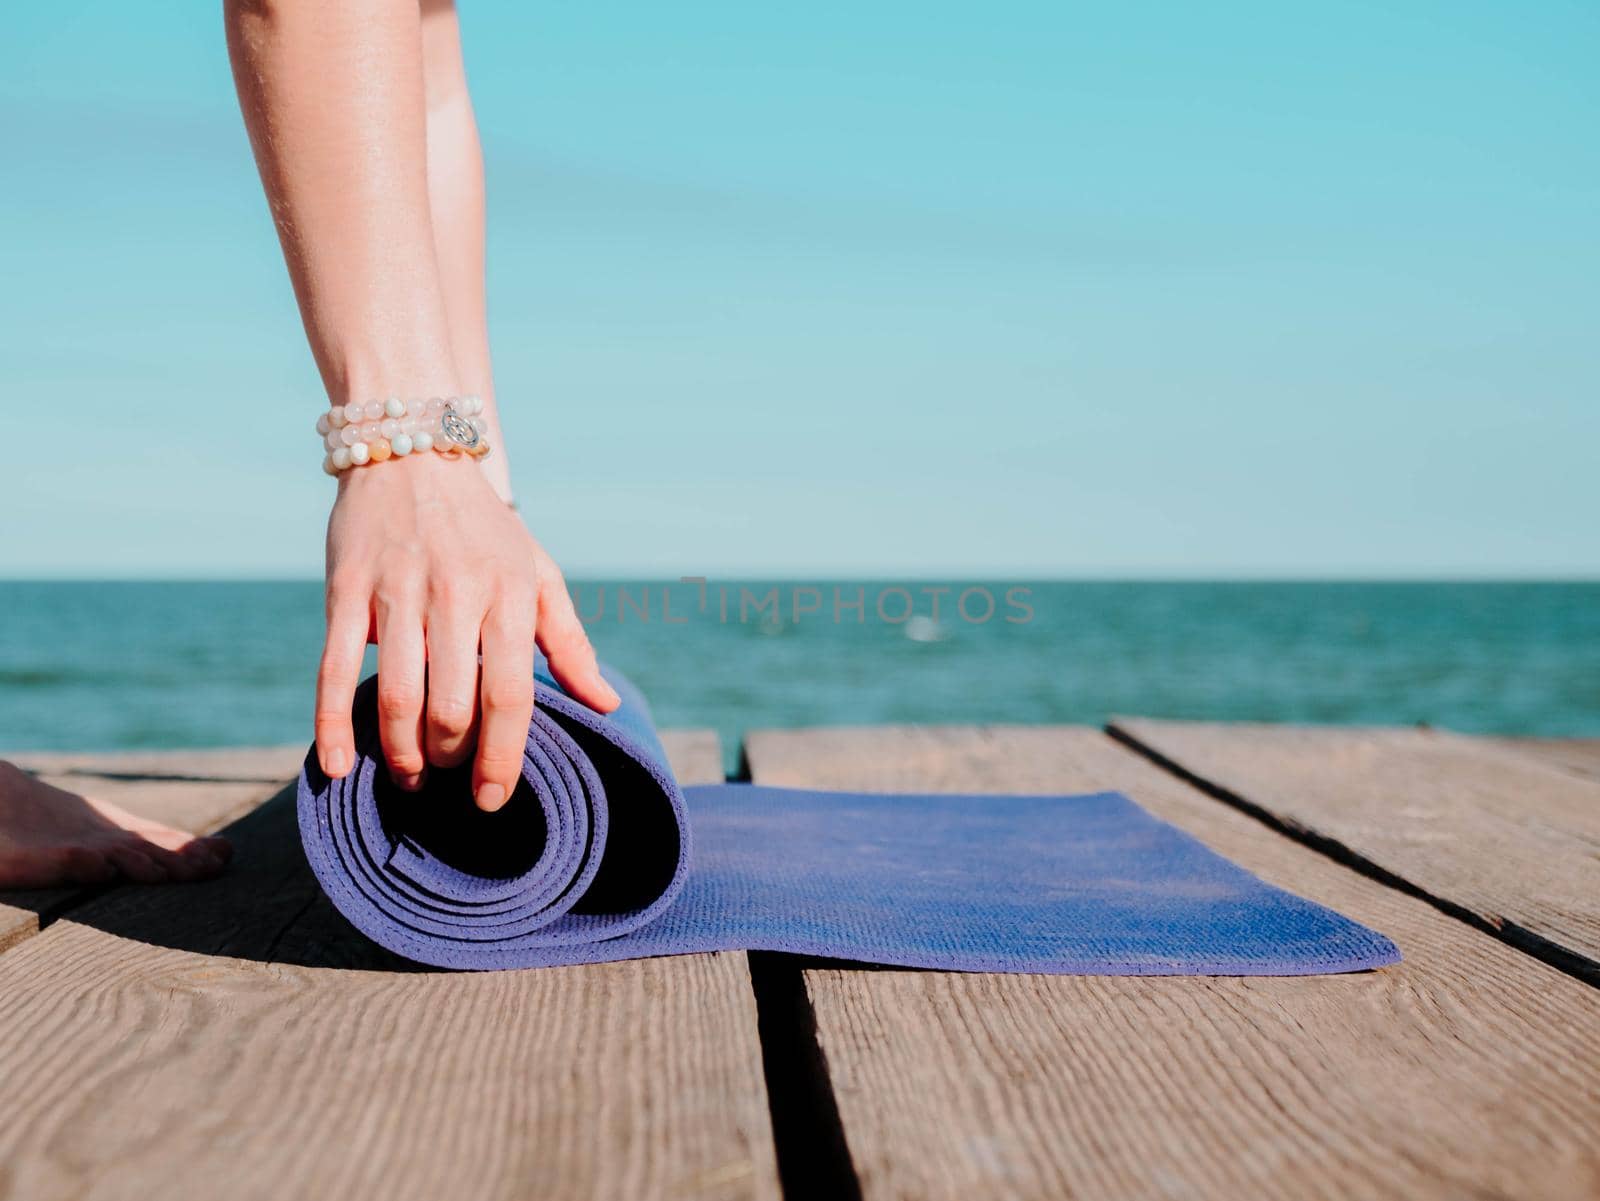 Young beautiful sporty woman preparing for yoga asana on sea beach near water. Girl covering purple mat. Health concept. High quality photo